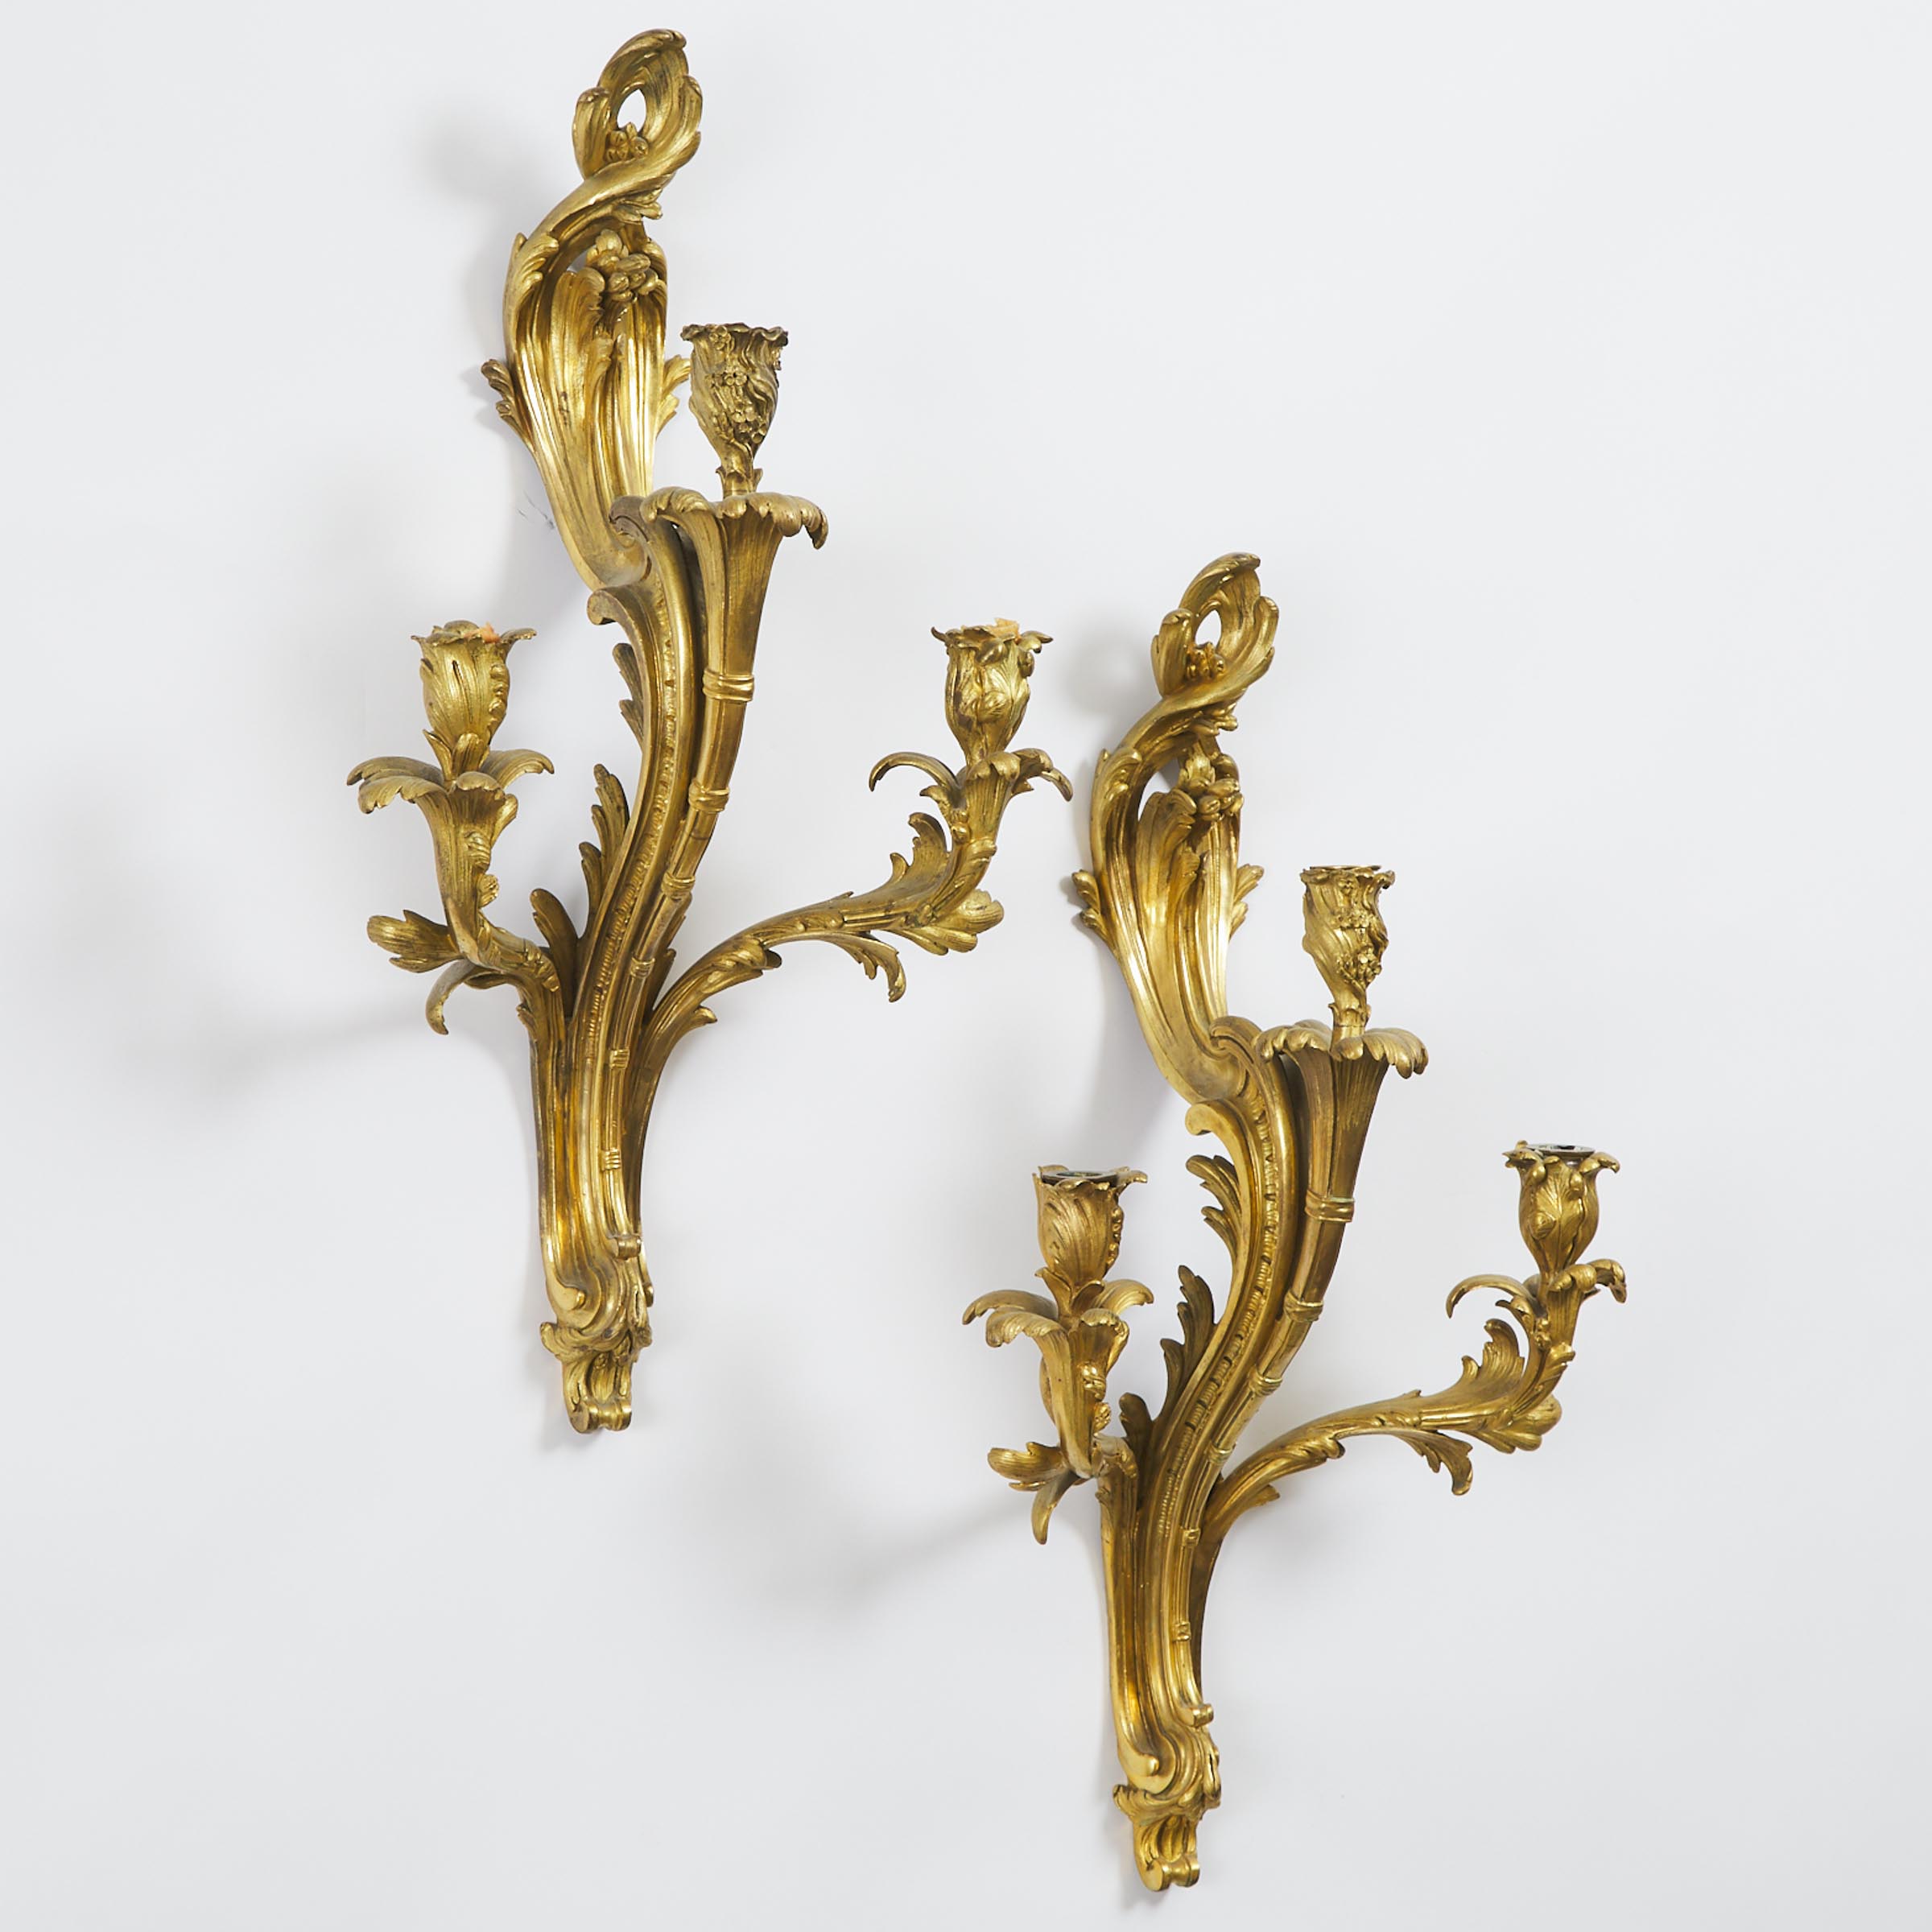 Large Pair of Louis XV Style Gilt Bronze Three Light Wall Sconces, 19th/early 20th century